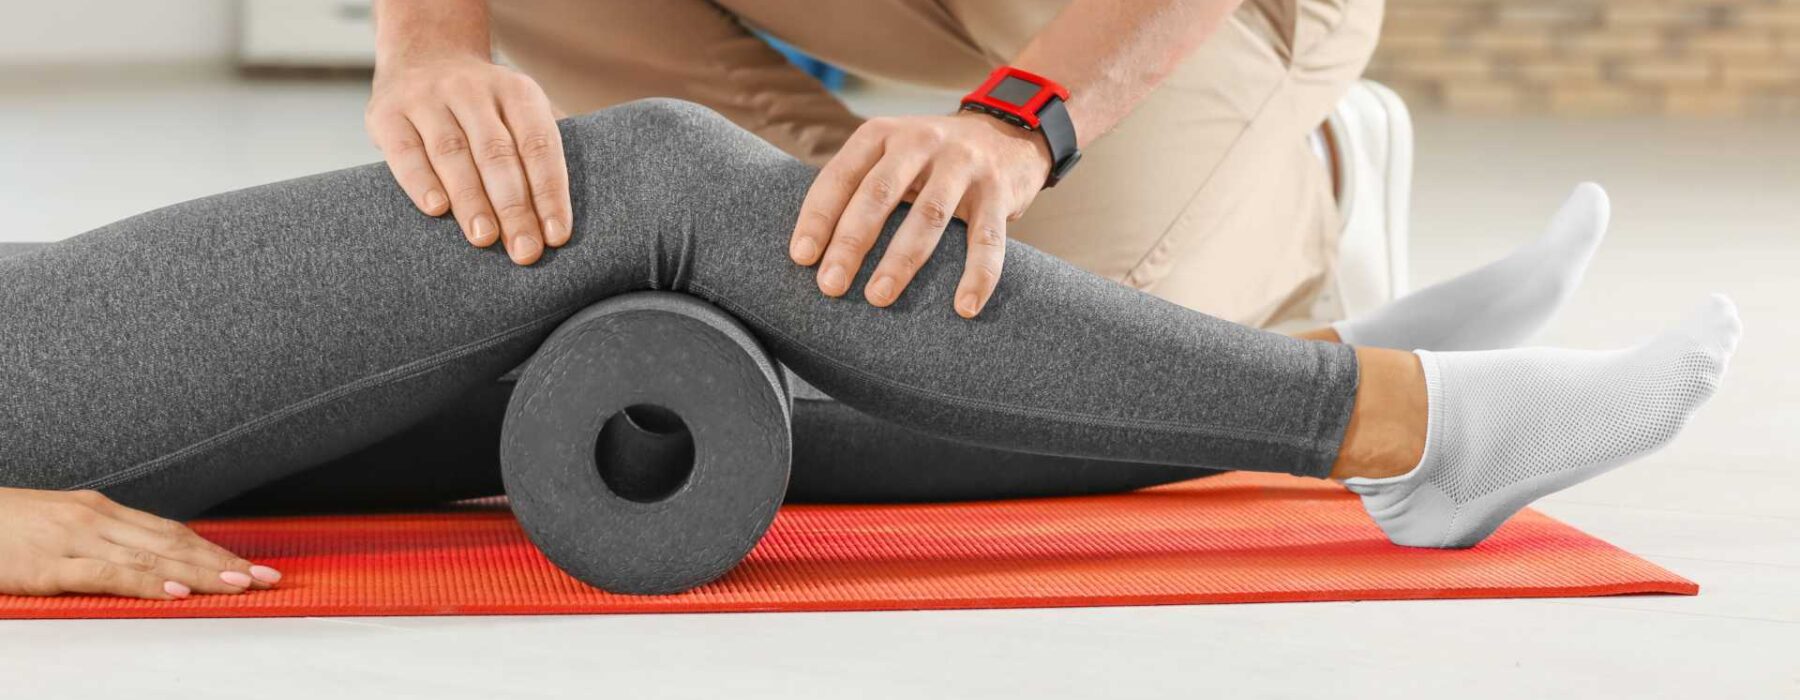 Foam Rolling Can Help Keep You Injury Free, City Physiotherapy Adelaide  City – Massage, Online Booking, Physio Near Me, Rehab